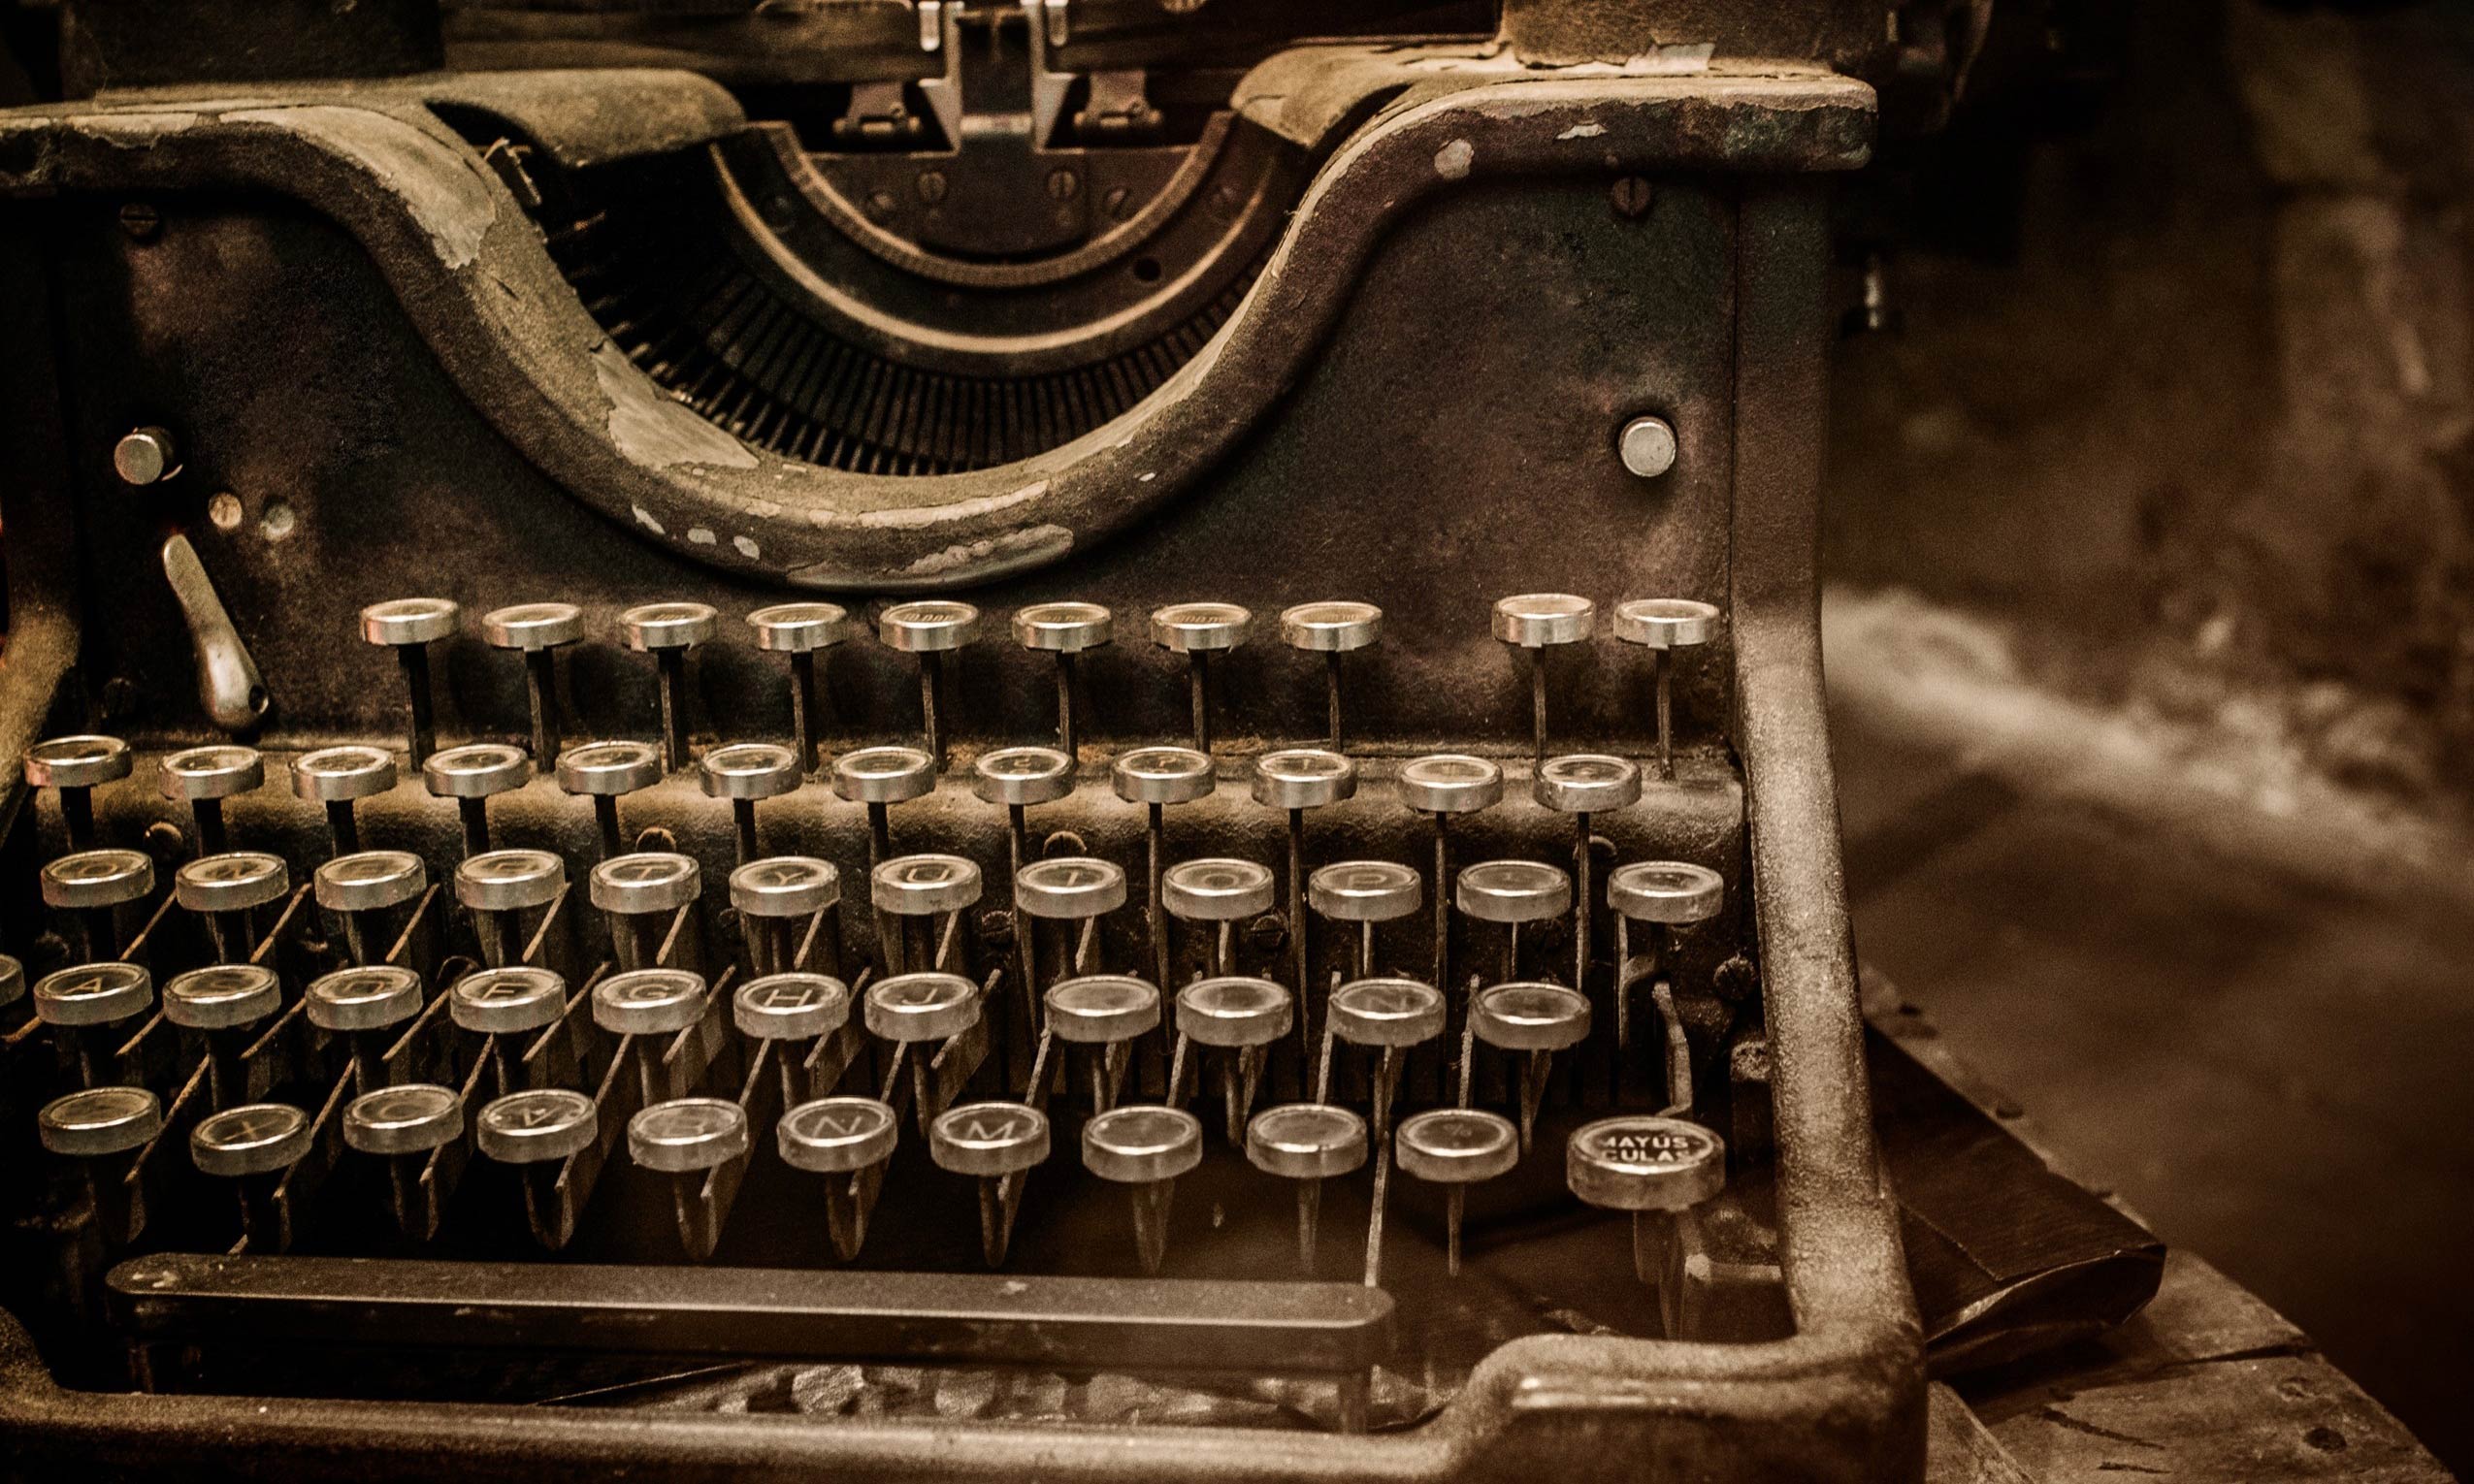 Crave the clack-clack of a typewriter? There's finally an app for that, thanks to Tom Hanks.